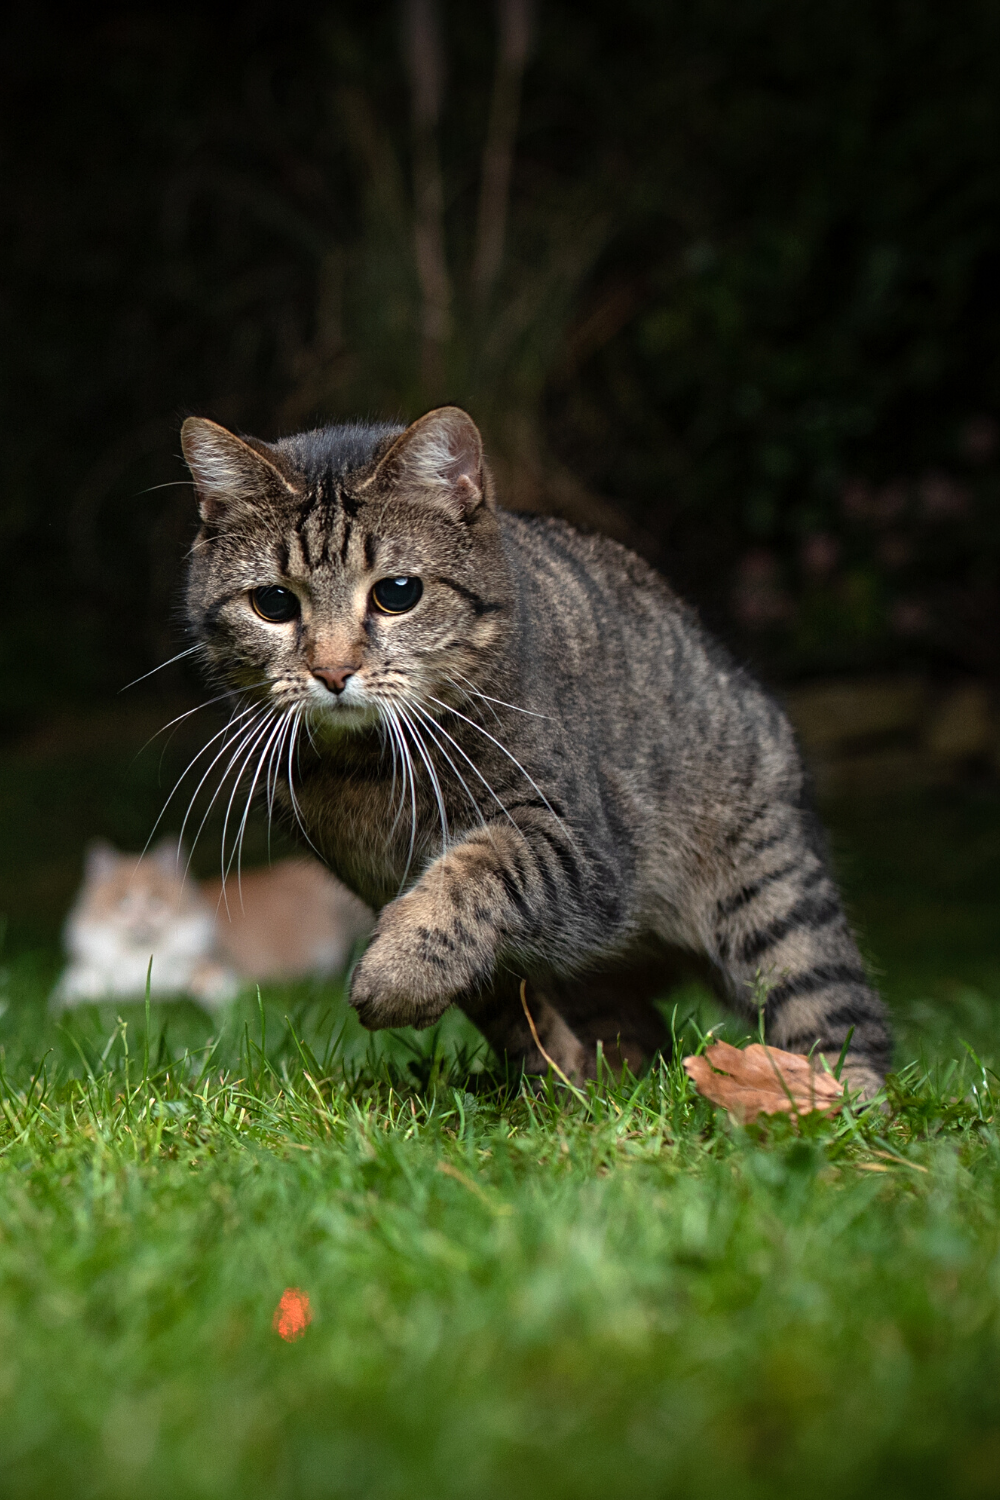 Even if cats are domesticated, they don't lose their natural instincts, which includes hunting for food